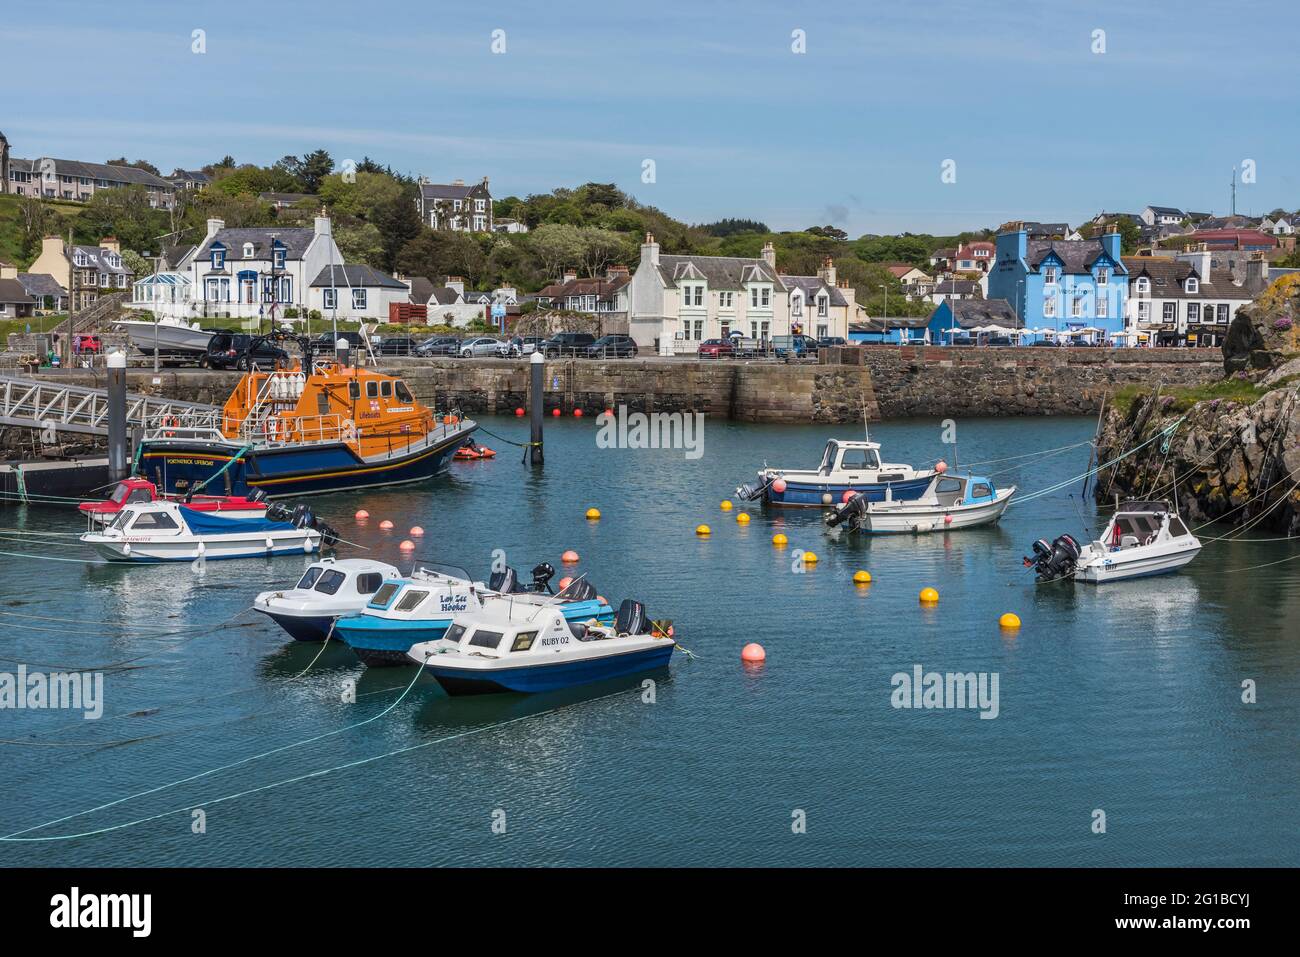 Portpatrick marina at Portpatrick a small coastal town and past ferry port on the Dumfries and Galloway peninsula on the west coast of Scotland Stock Photo